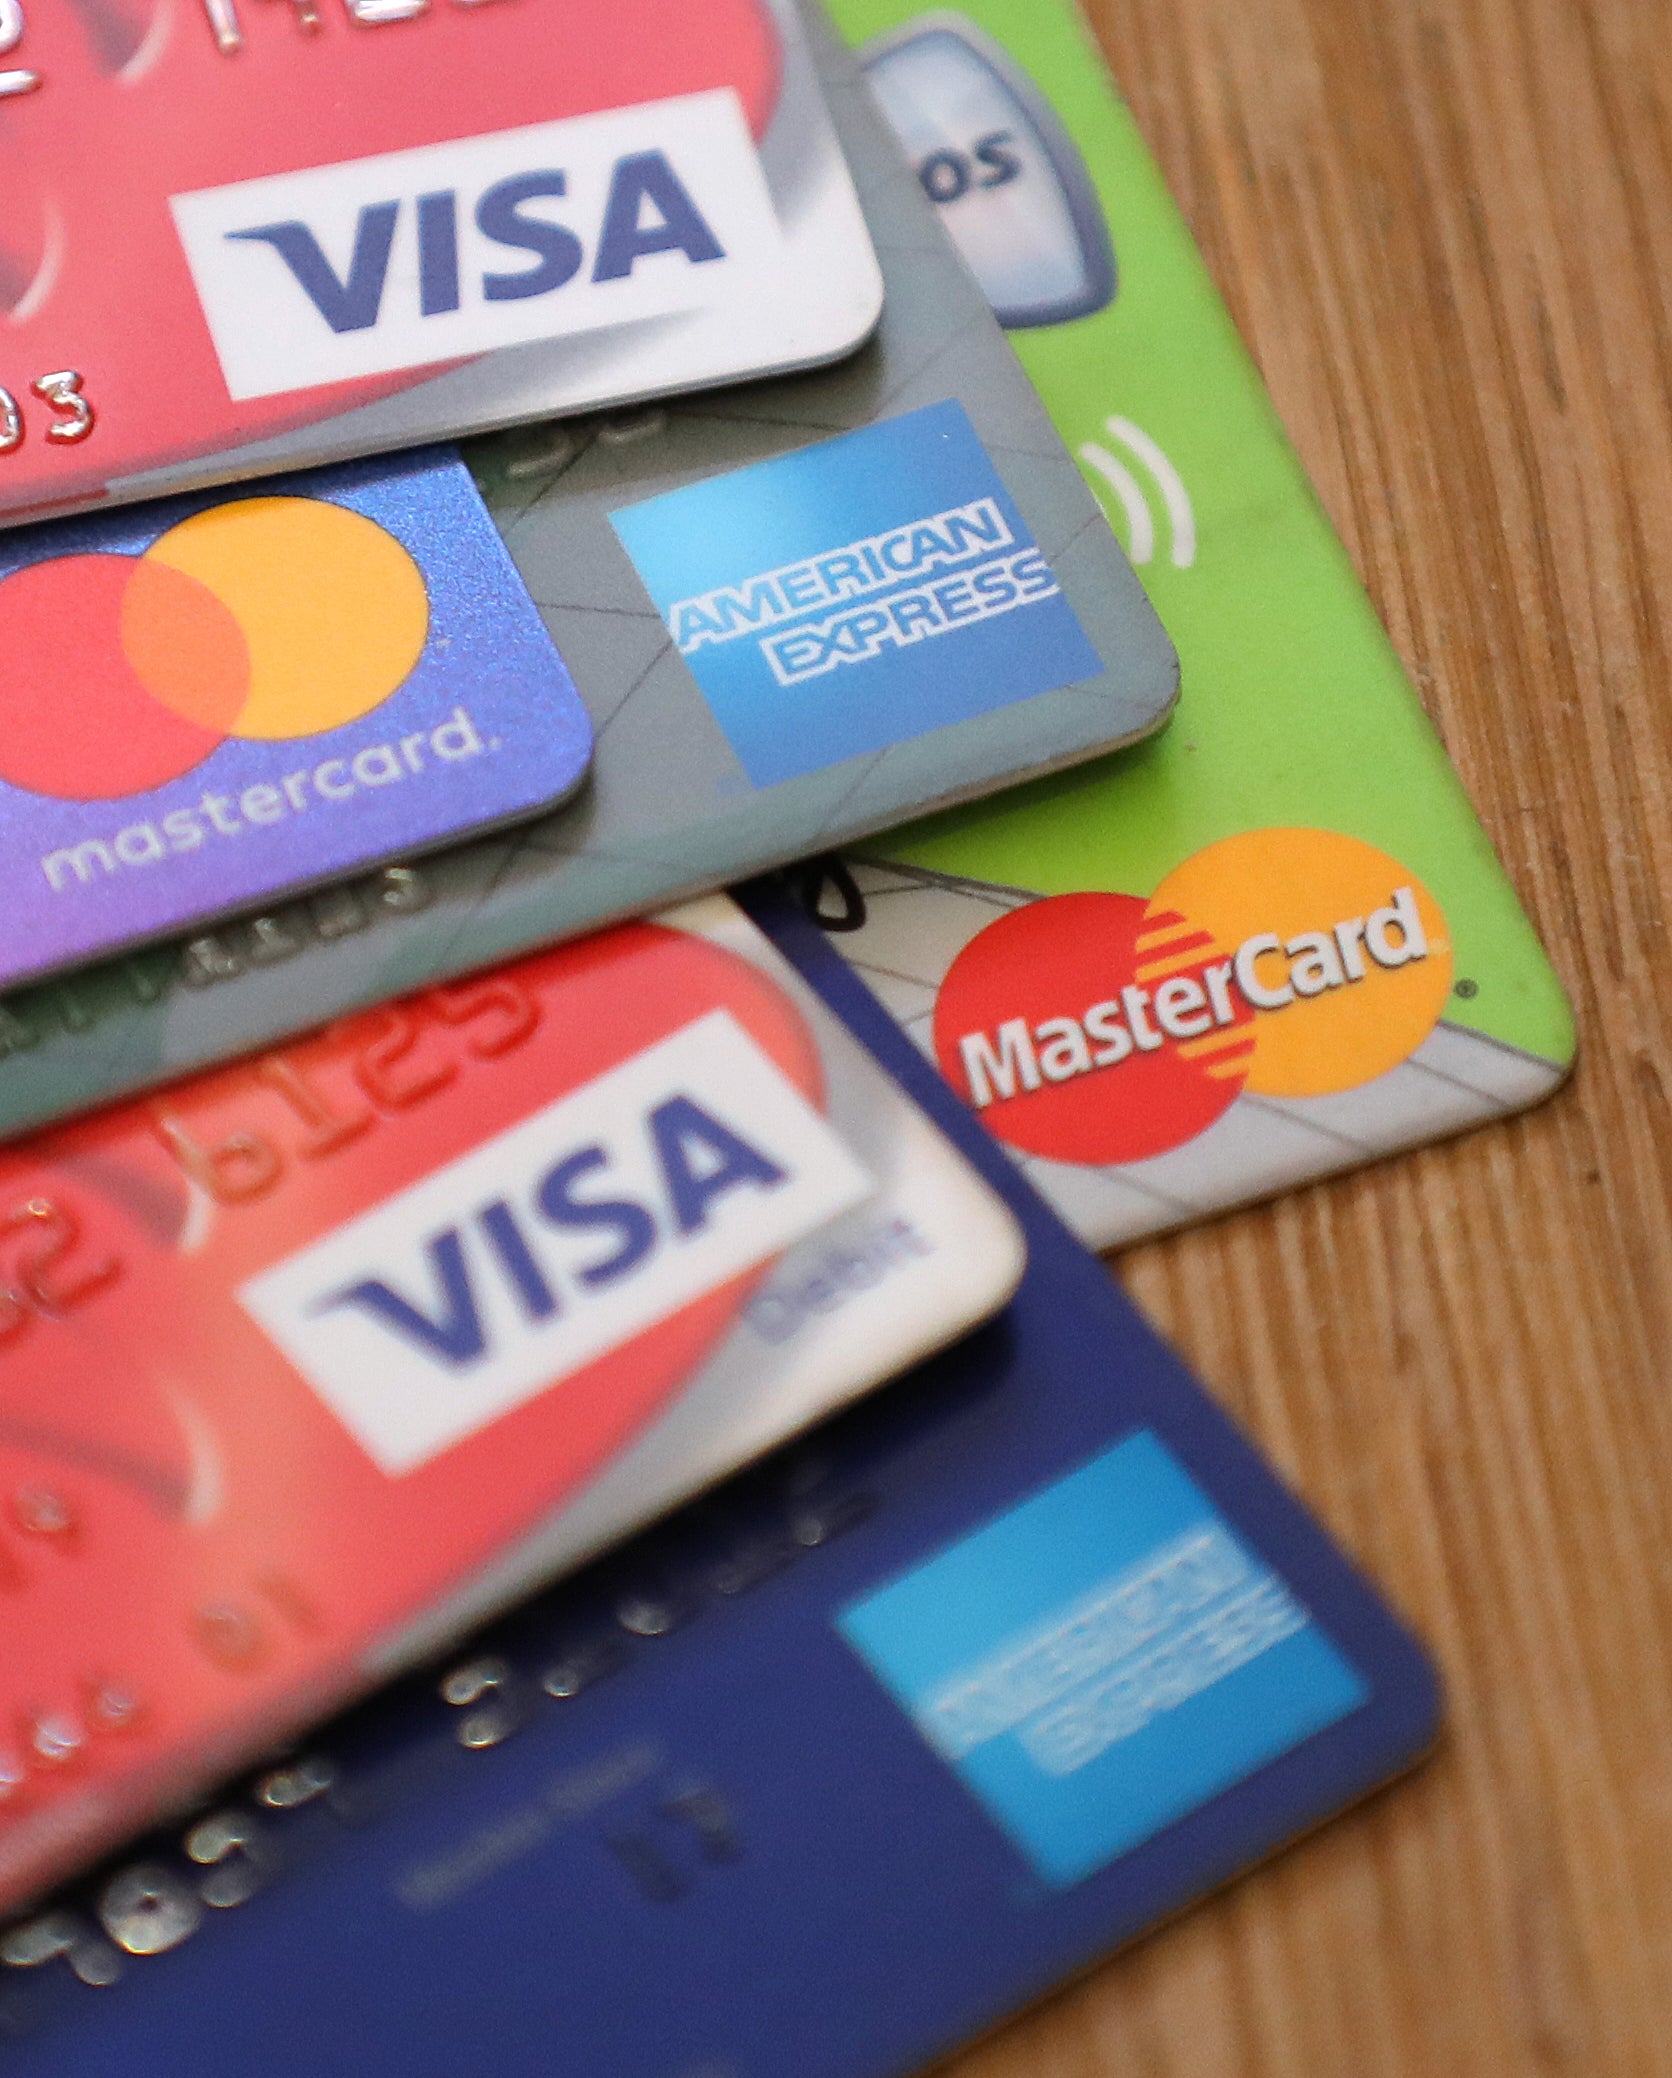 Two-fifths of Generation Z credit card holders pay their balance off in full every month, a survey suggests (Andrew Matthews/PA)